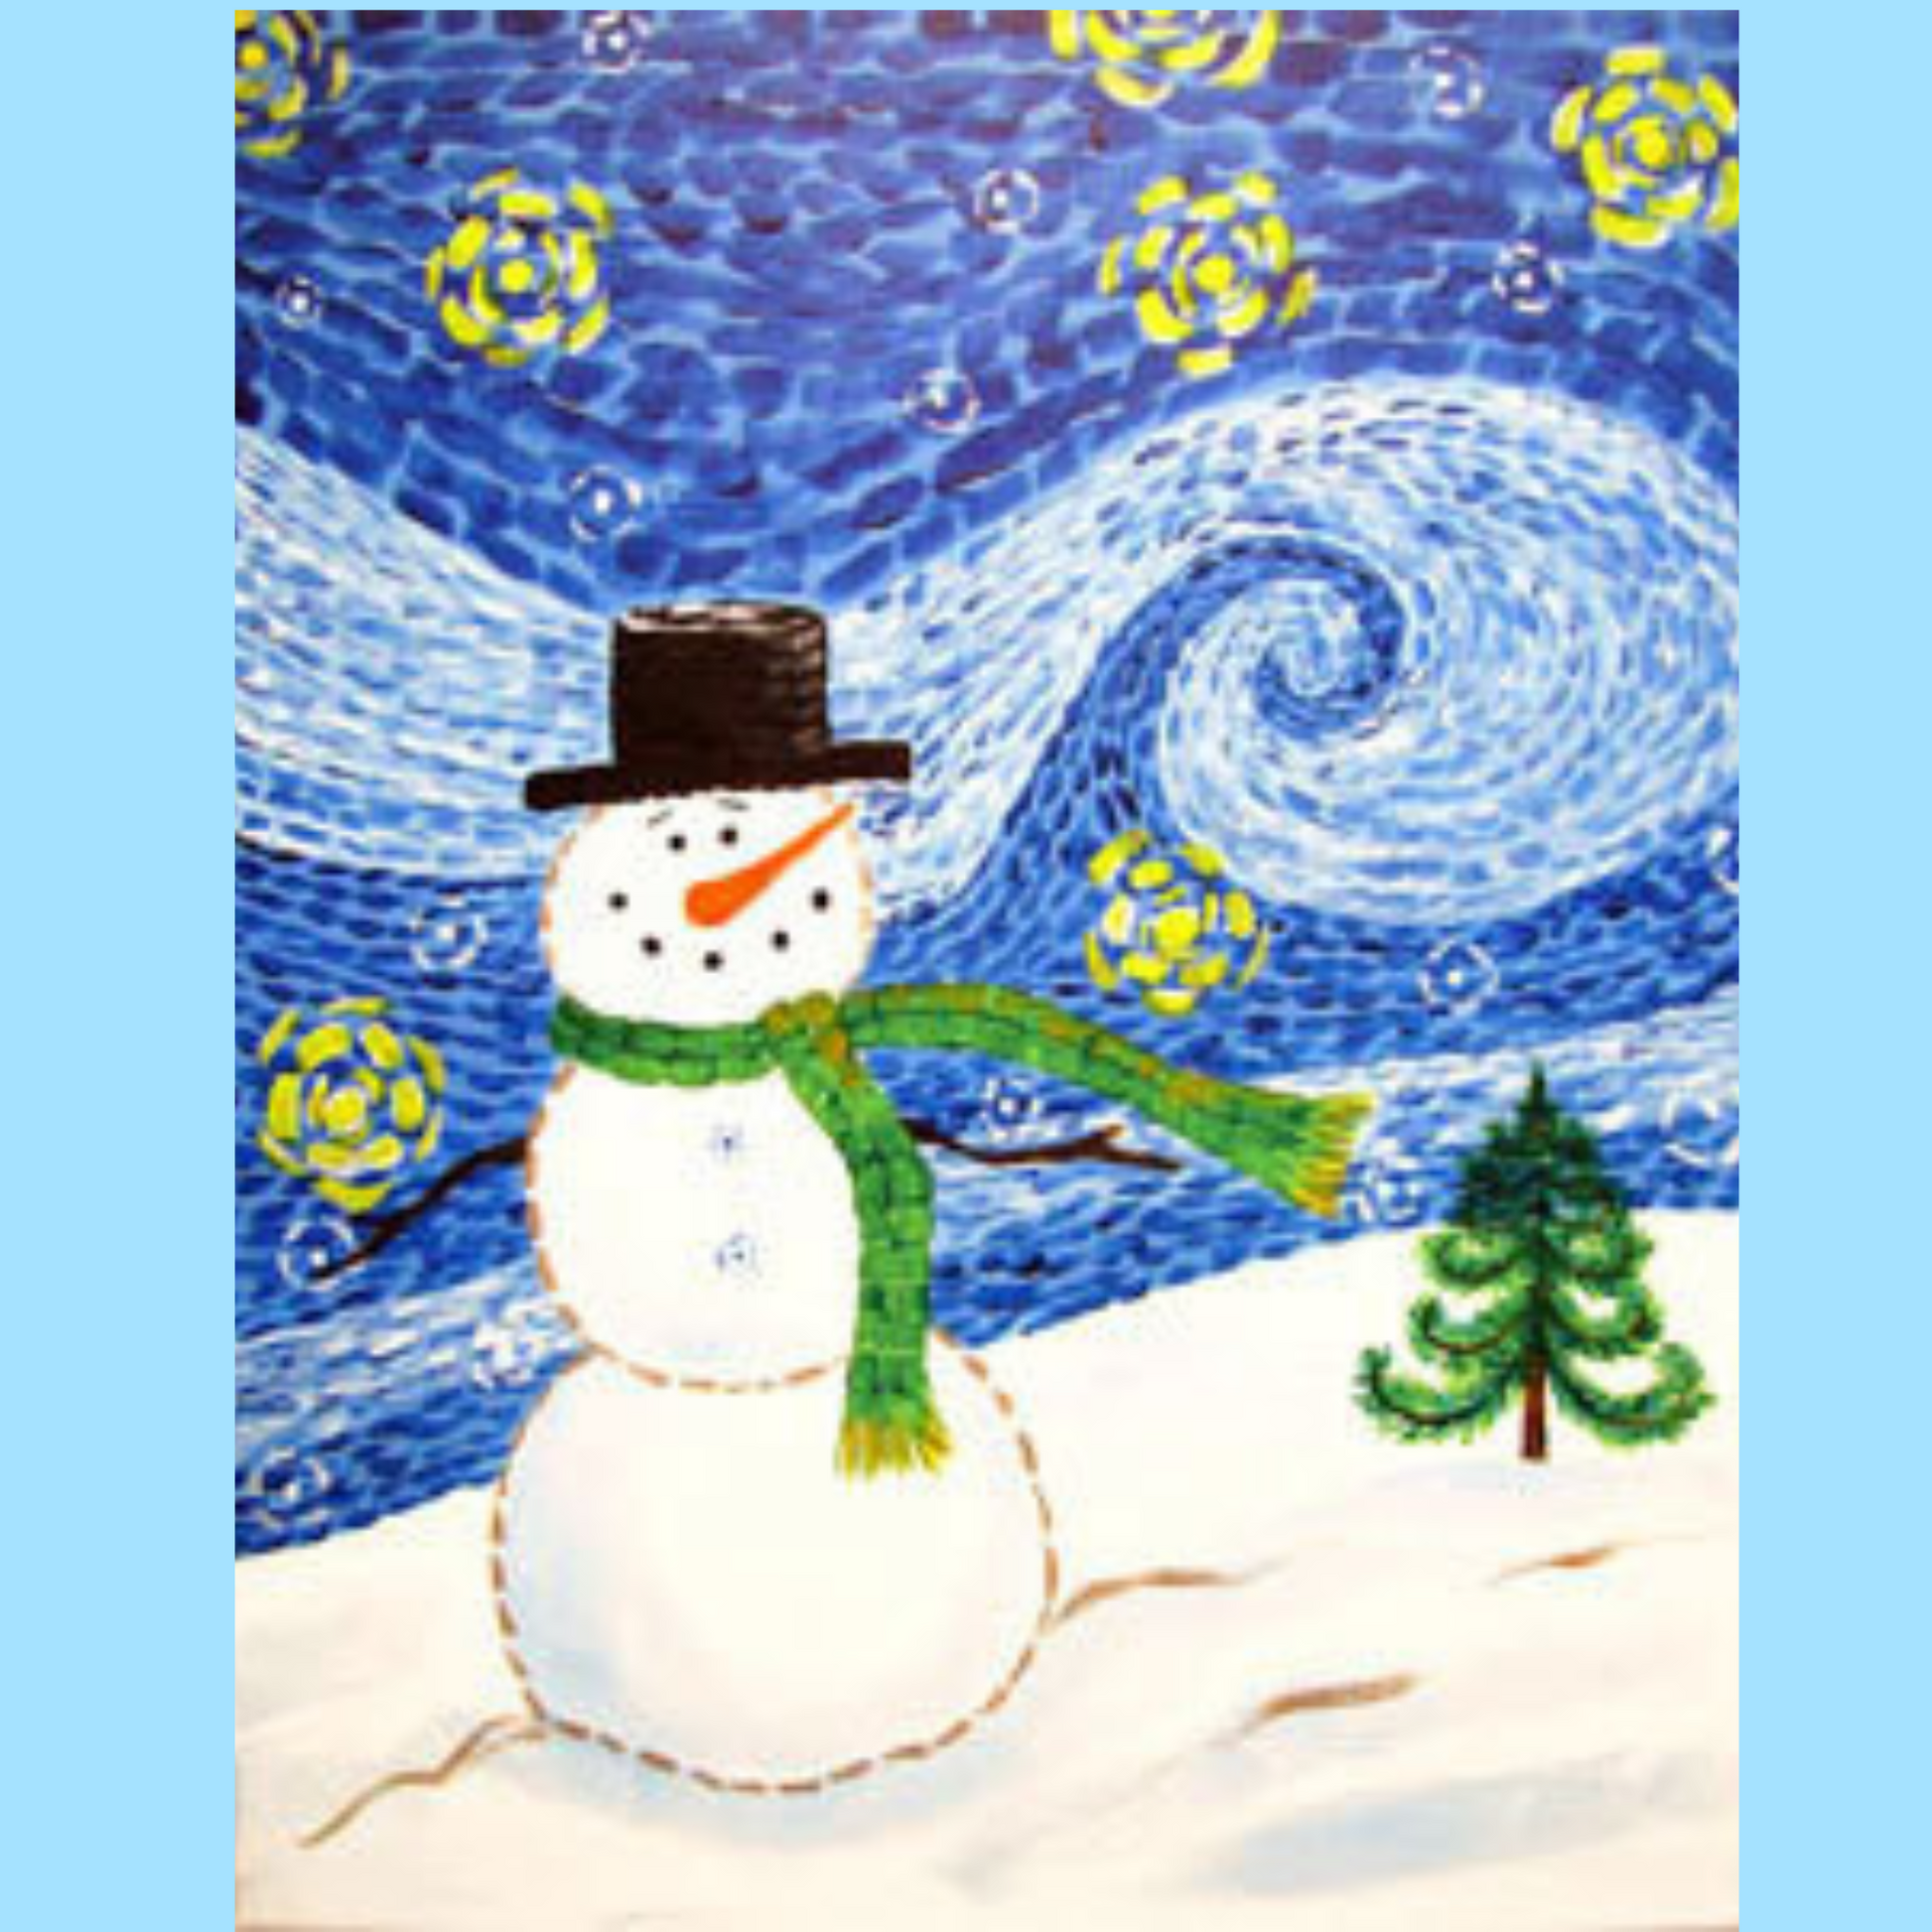 Star Gazer Snowman Art Party Kit! At Home Paint Party Supplies